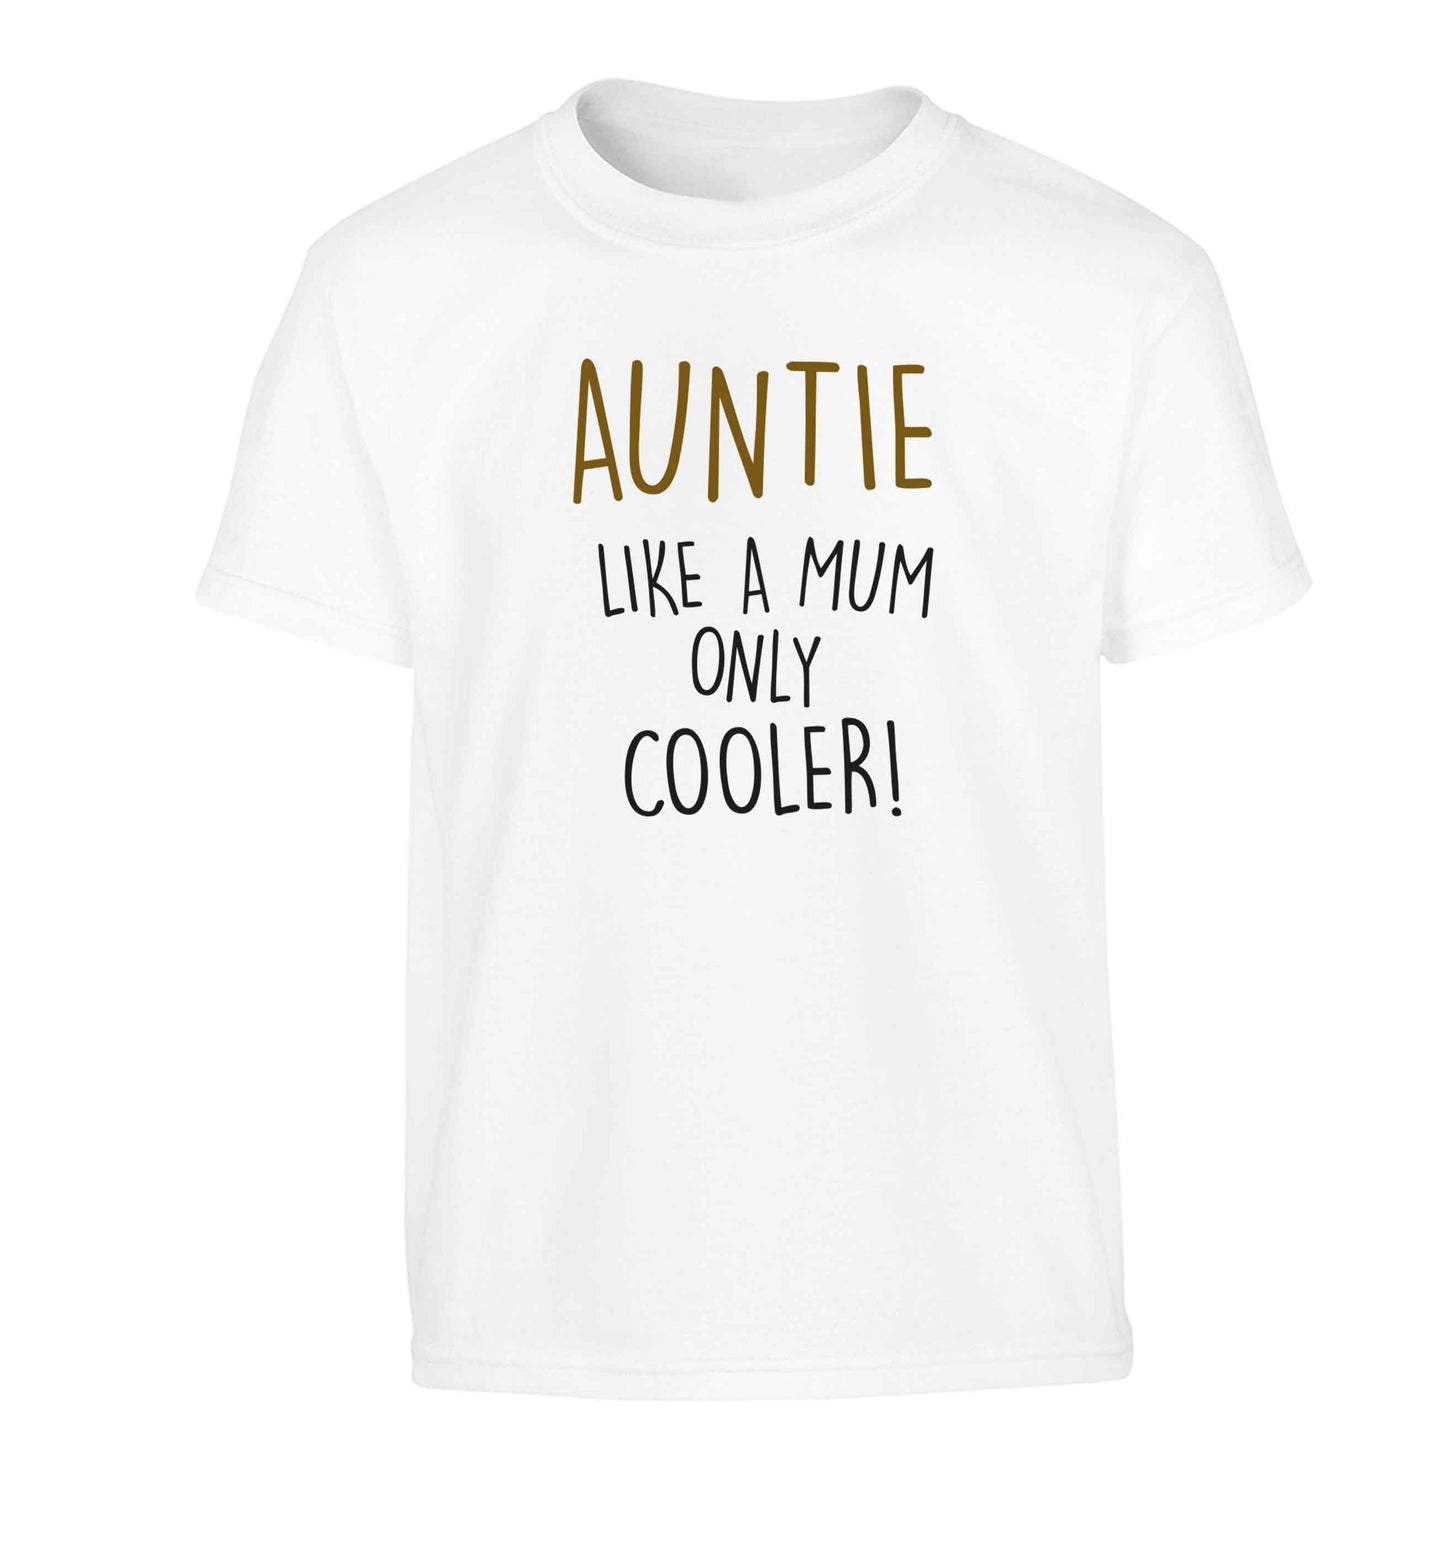 Auntie like a mum only cooler Children's white Tshirt 12-13 Years